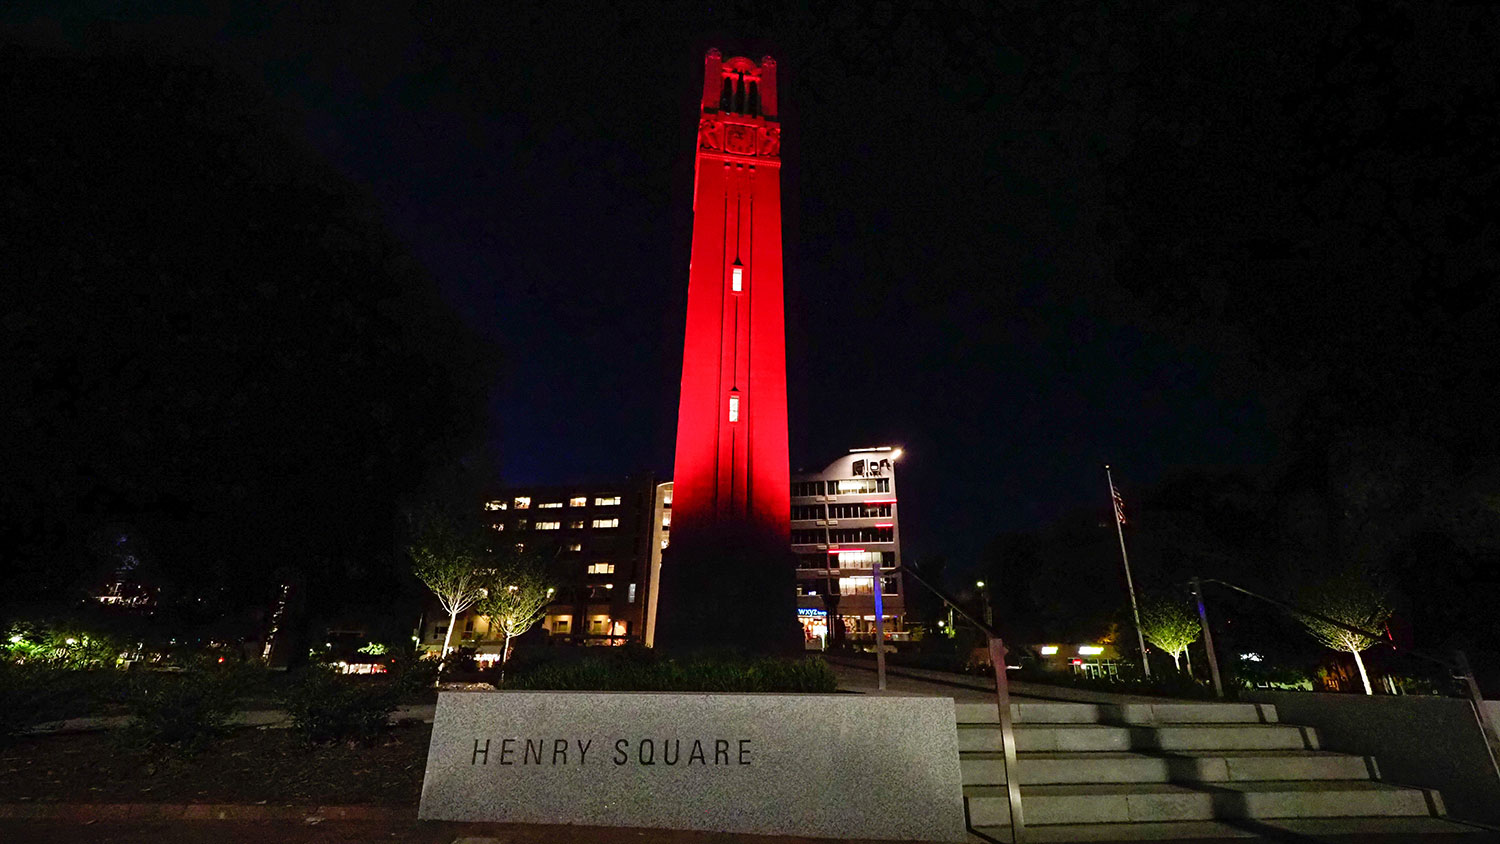 Photo of the Belltower lit up in red